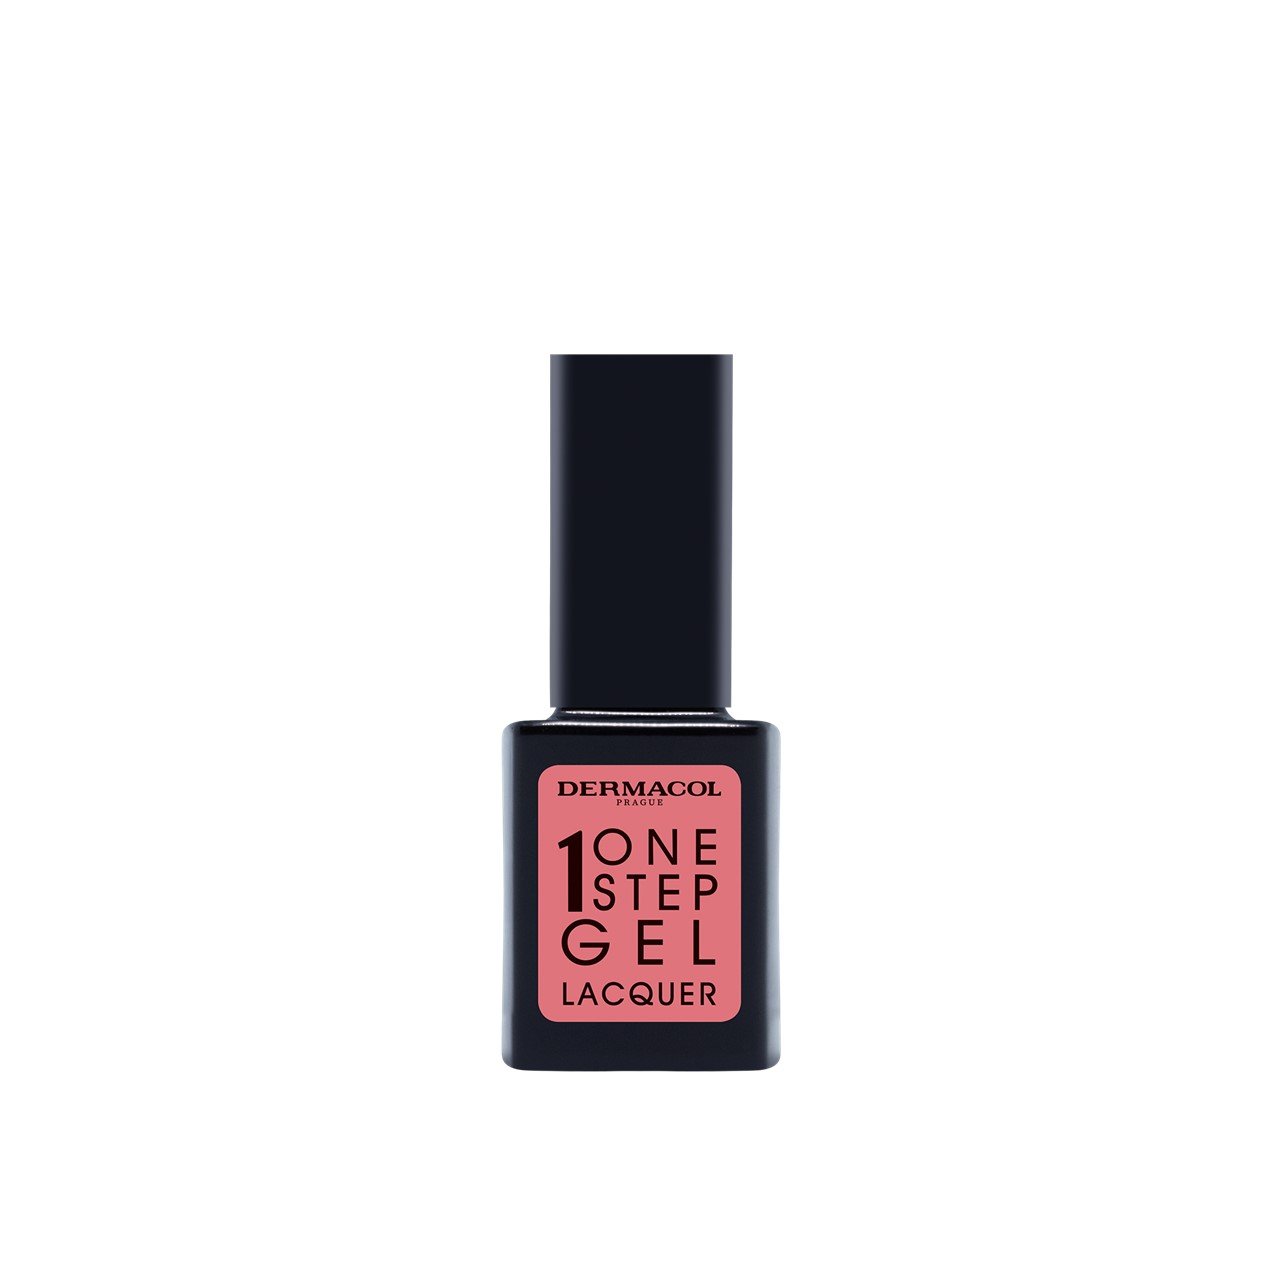 Dermacol One Step Gel Lacquer 02 Ancient Pink 11ml